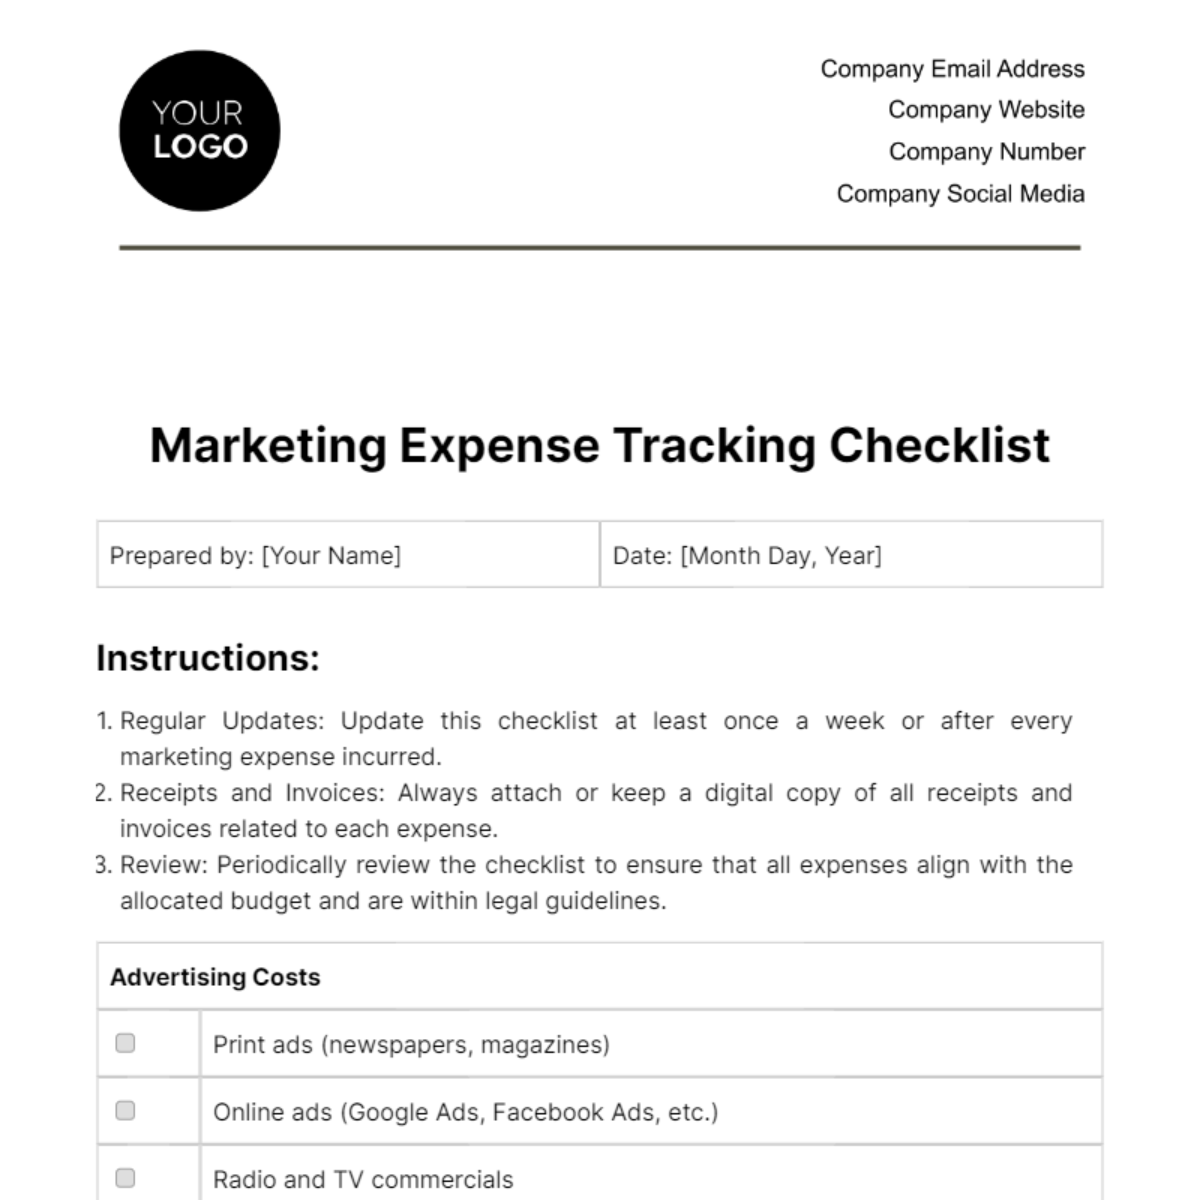 Free Marketing Expense Tracking Checklist Template